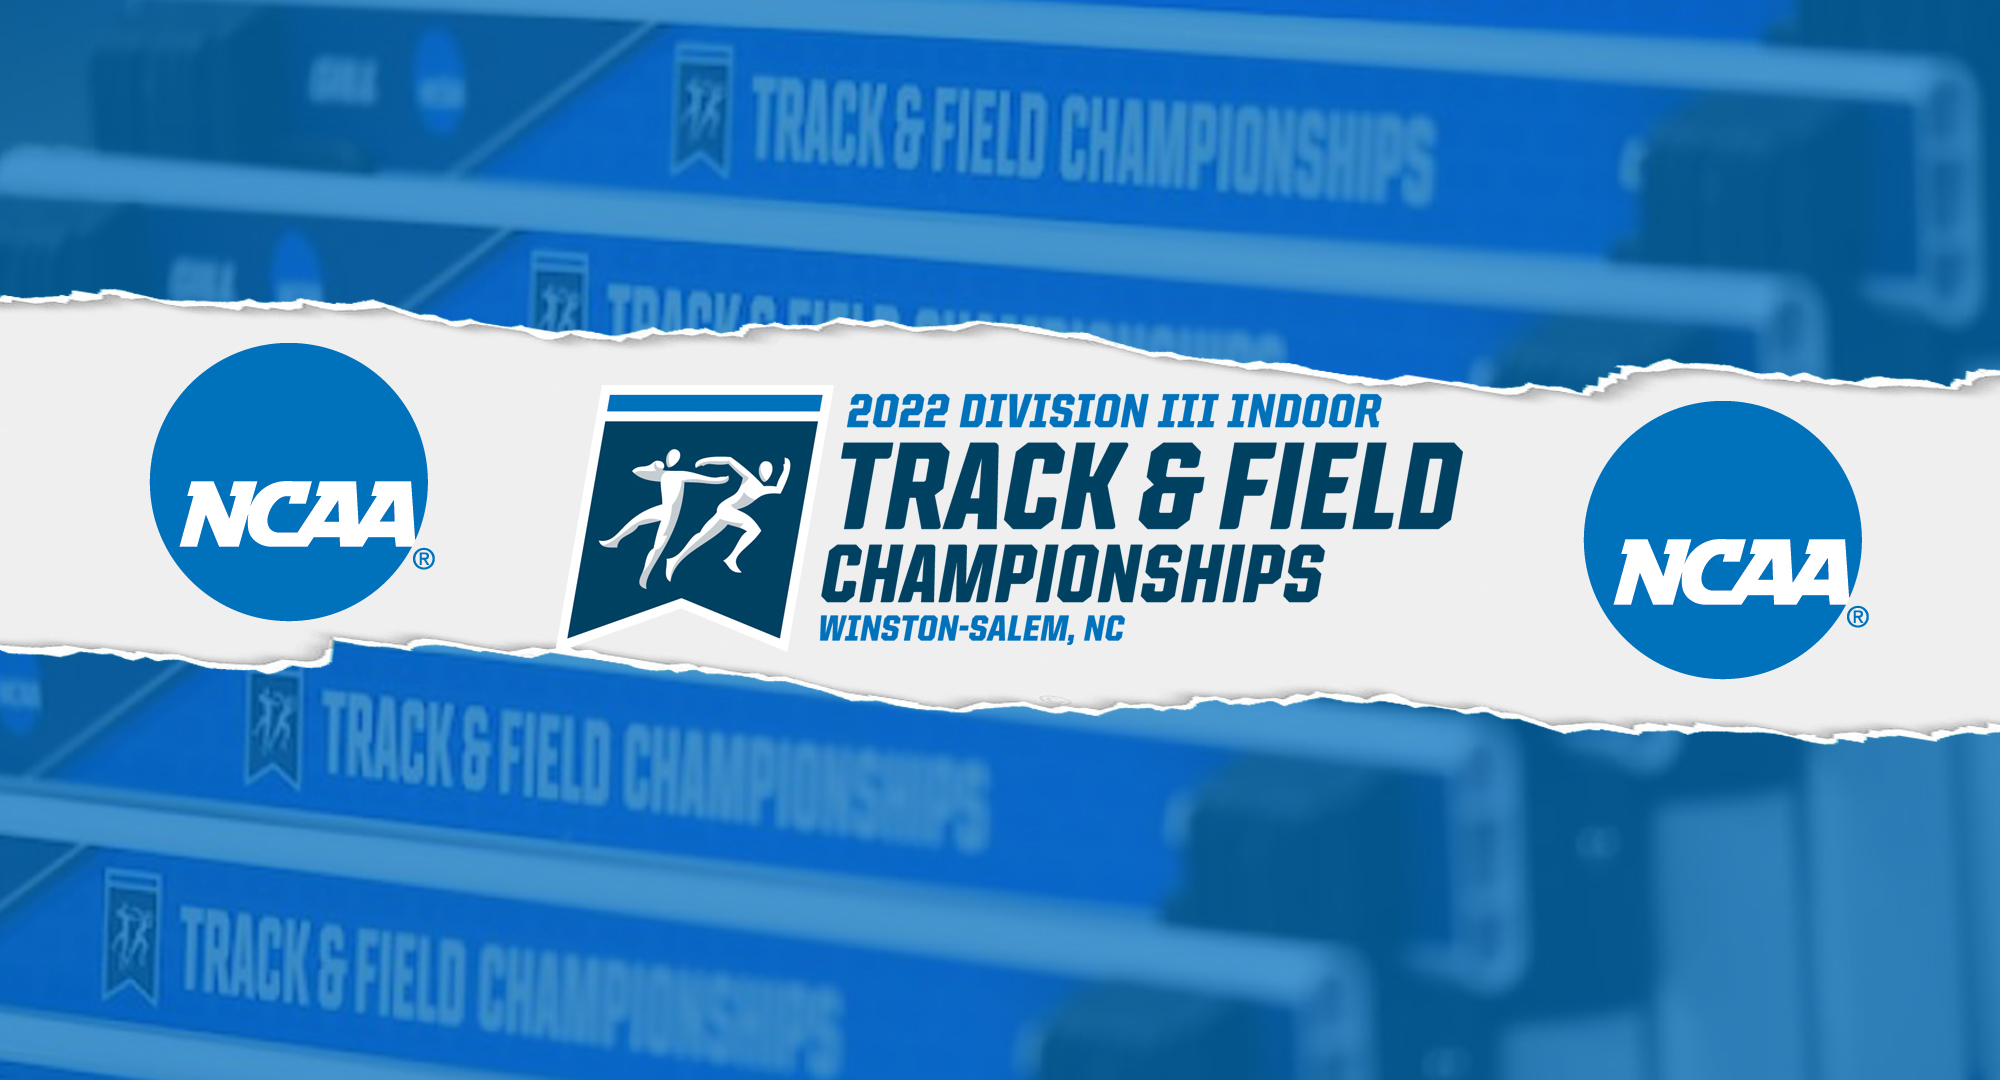 Concordia will send seven student-athletes to the NCAA National Indoor Championship Meet. The men's team has a program-record six set to compete.